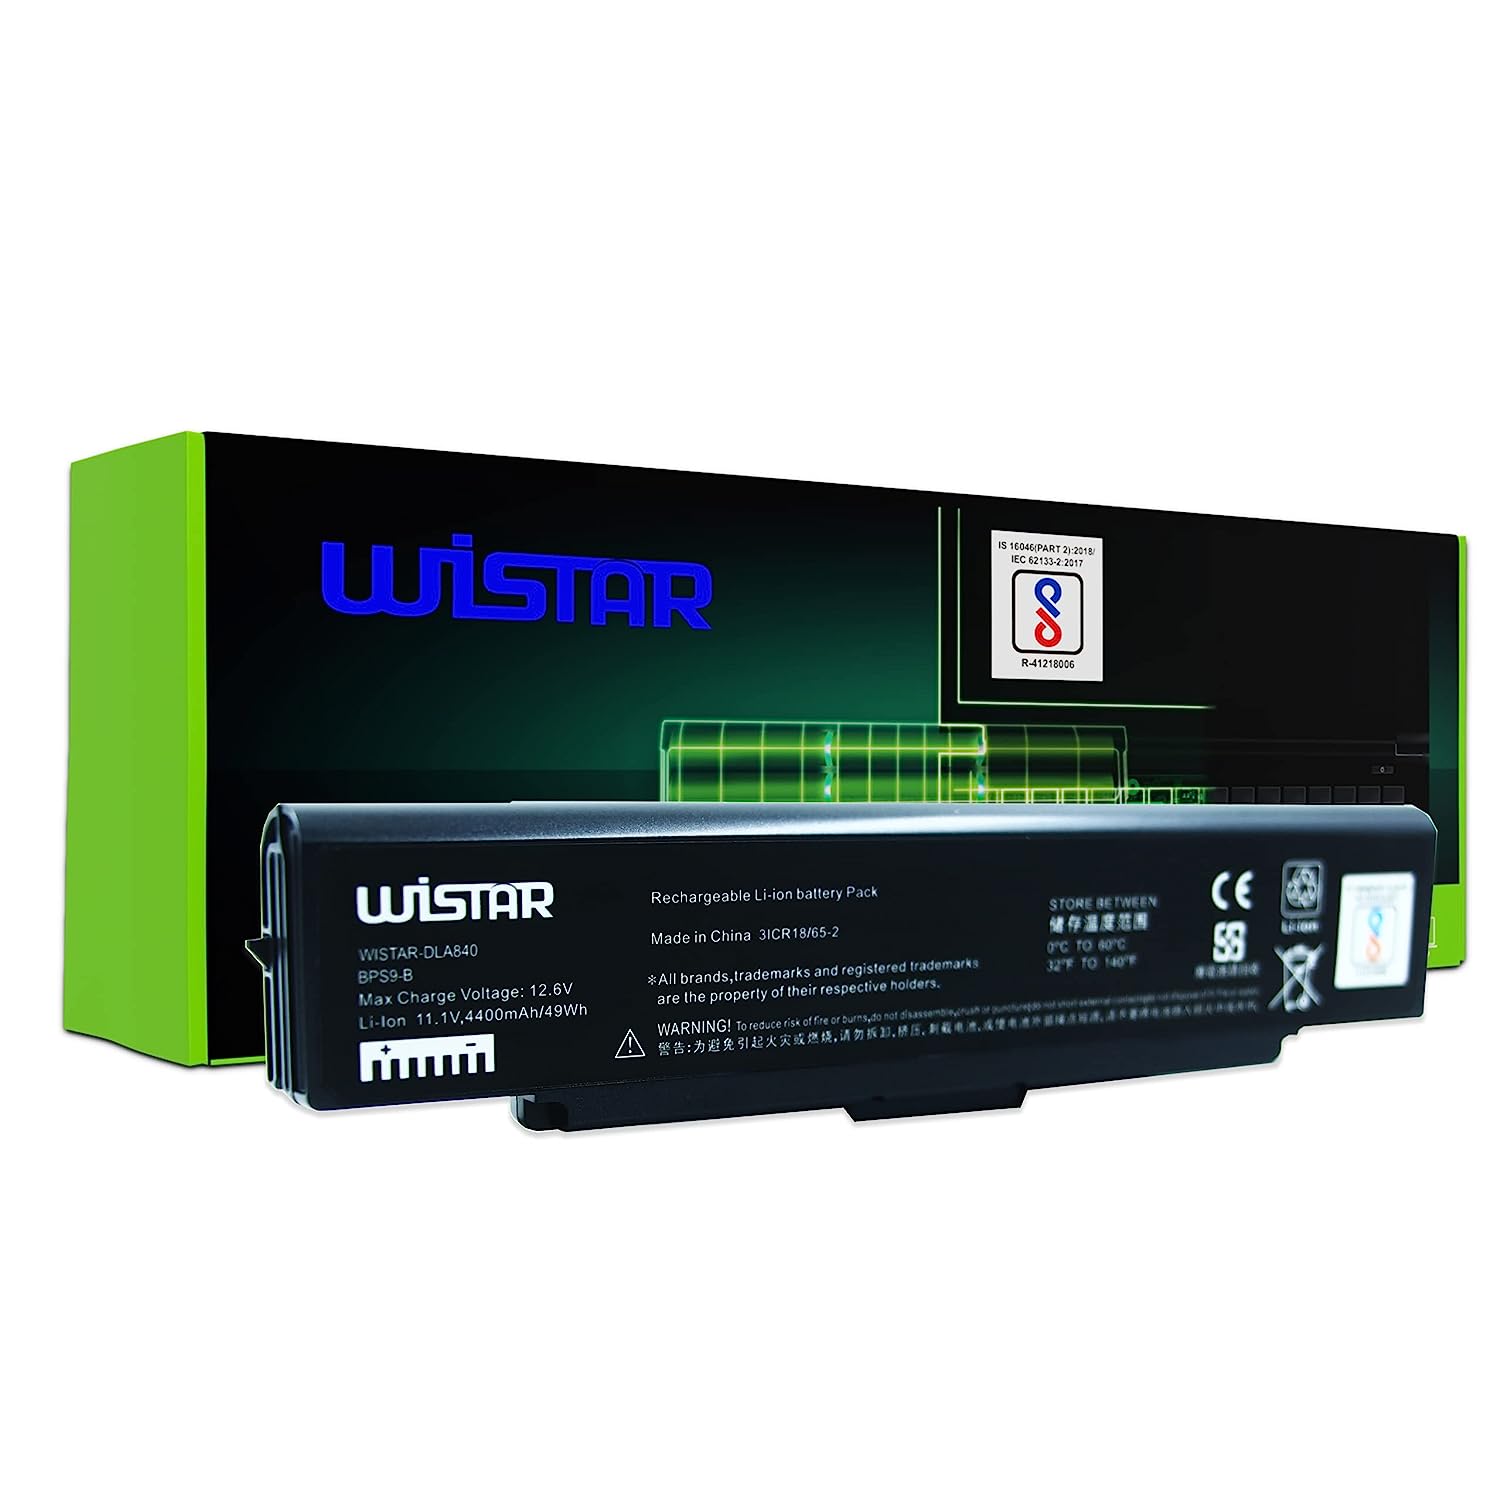 WISTAR Laptop Battery Compatible for Sony BPS9 VGP-BPL9 VGP-BPS9 VGP-BPS9/B VGP-BPS9/S VGP-BPS9A VGP-BPS9A/B